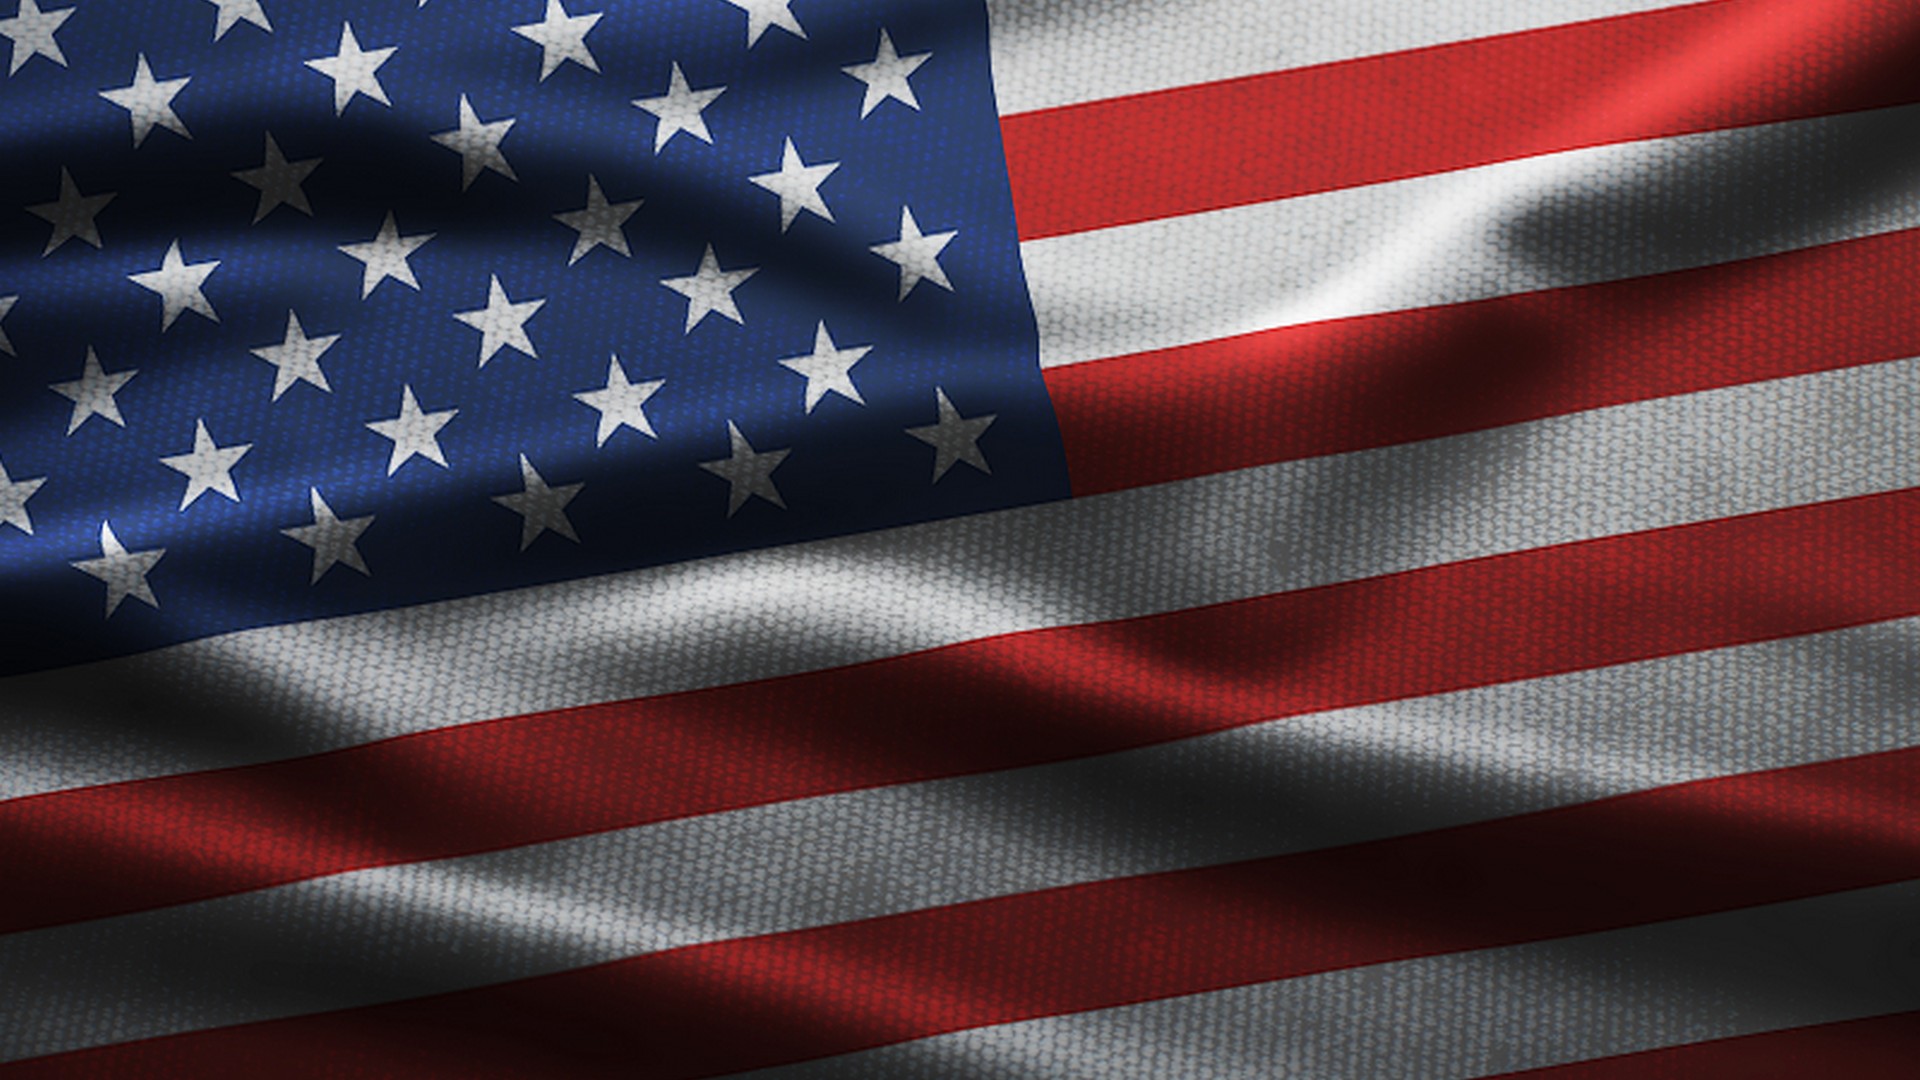 American Flag Background Wallpaper HD With high-resolution 1920X1080 pixel. You can use this wallpaper for your Desktop Computer Backgrounds, Mac Wallpapers, Android Lock screen or iPhone Screensavers and another smartphone device